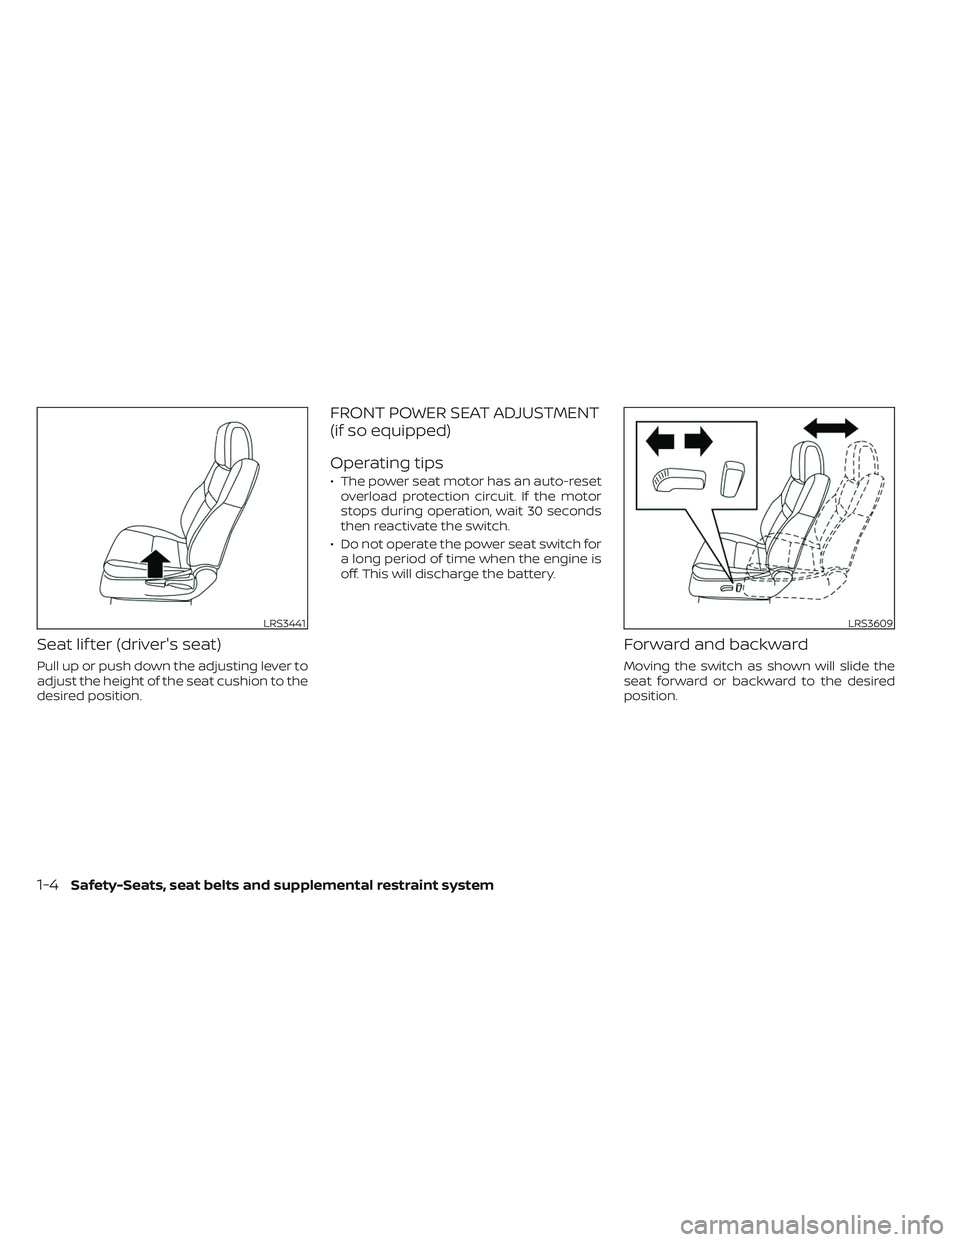 NISSAN FRONTIER 2023 Owners Manual Seat lif ter (driver's seat)
Pull up or push down the adjusting lever to
adjust the height of the seat cushion to the
desired position.
FRONT POWER SEAT ADJUSTMENT
(if so equipped)
Operating tips
